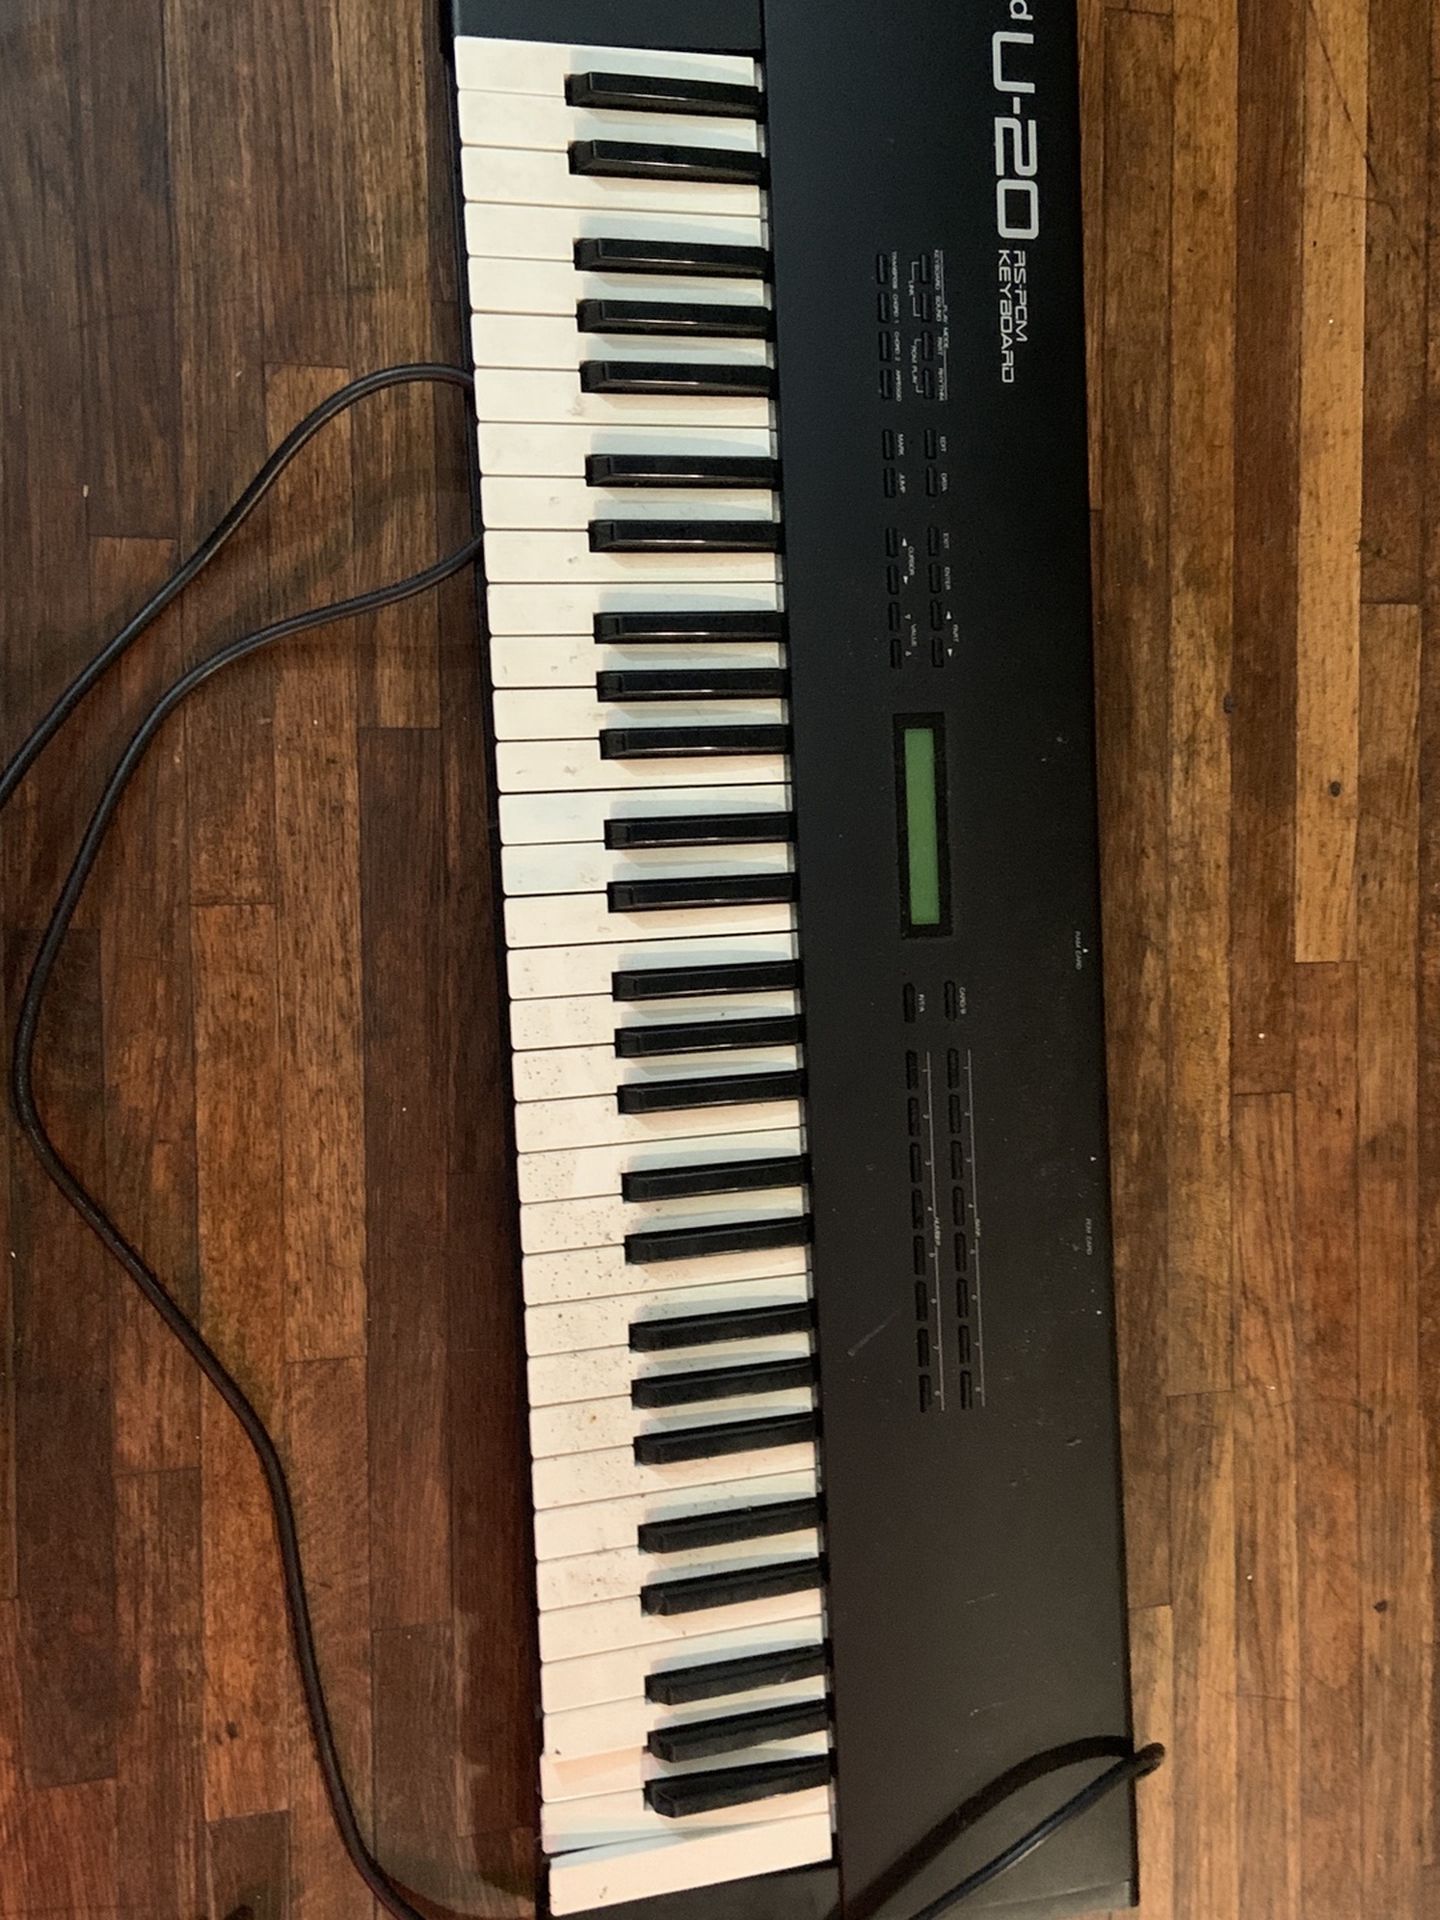 Piano Need Repair Or Can Be Used For Parts